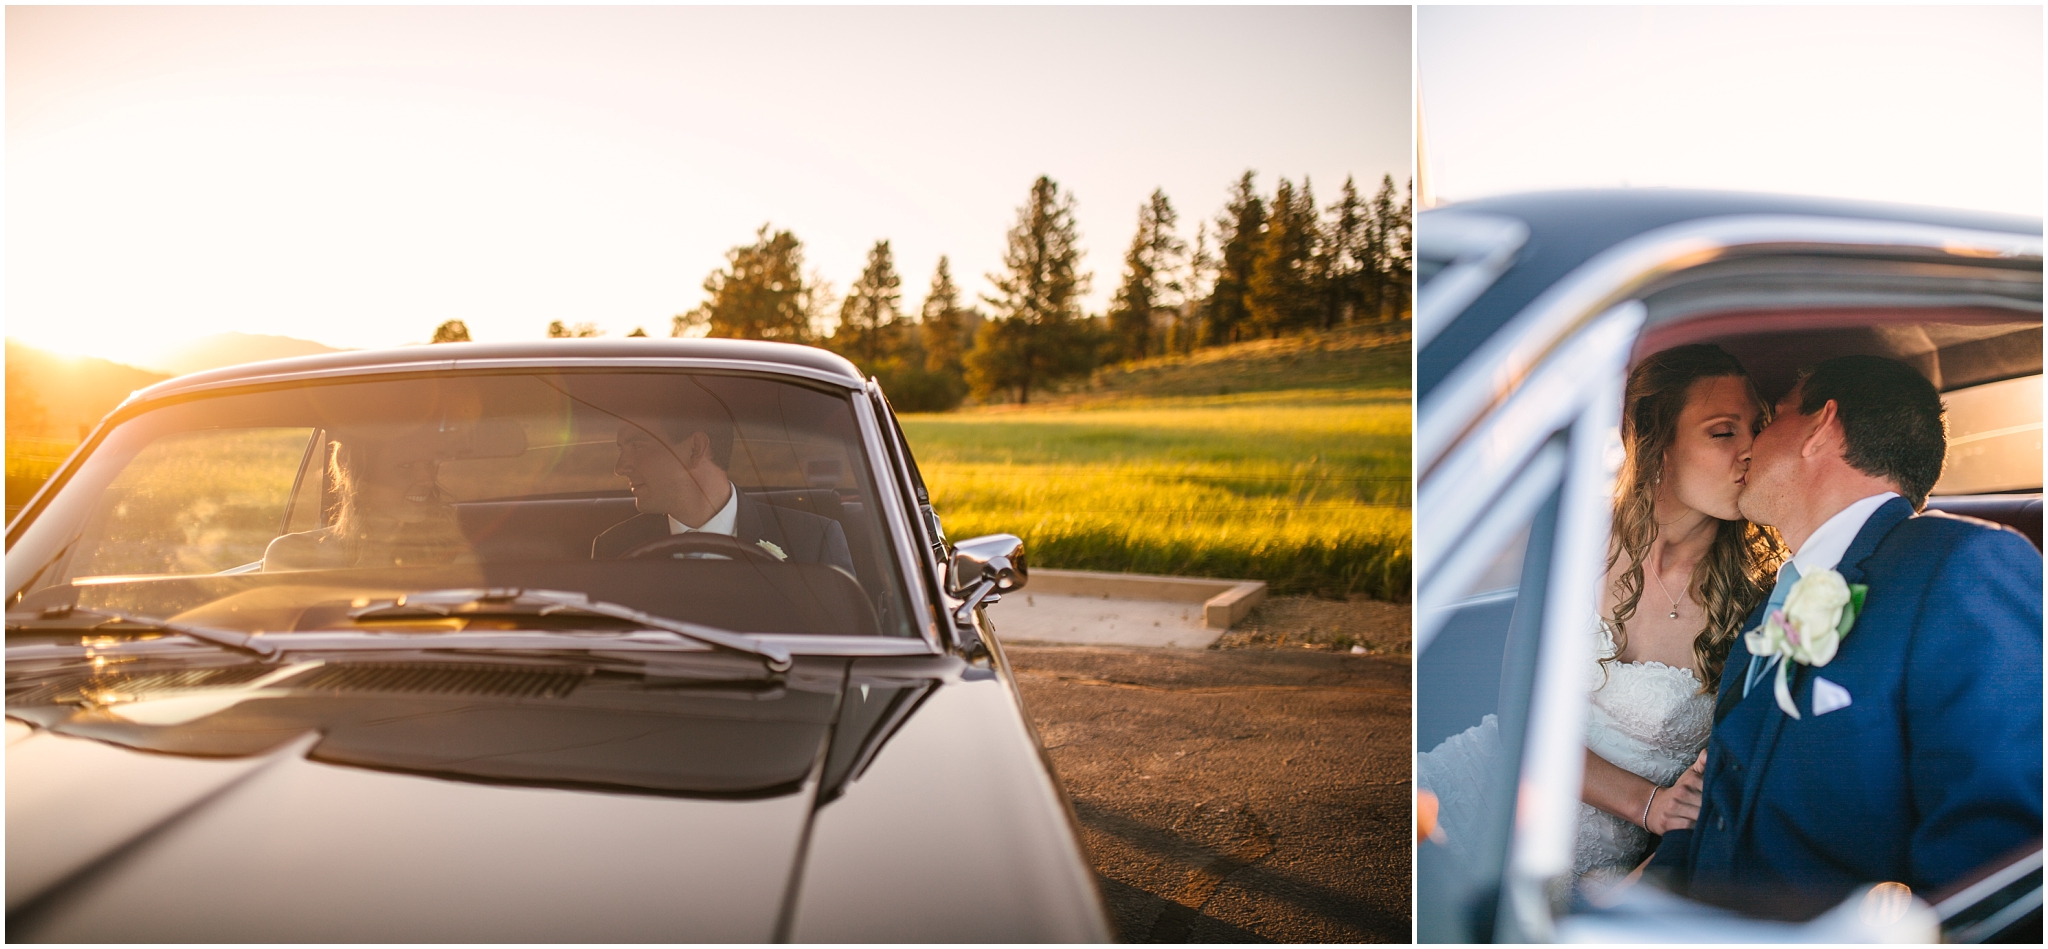 Bride and groom with classic car at sunset at Cle Elum wedding